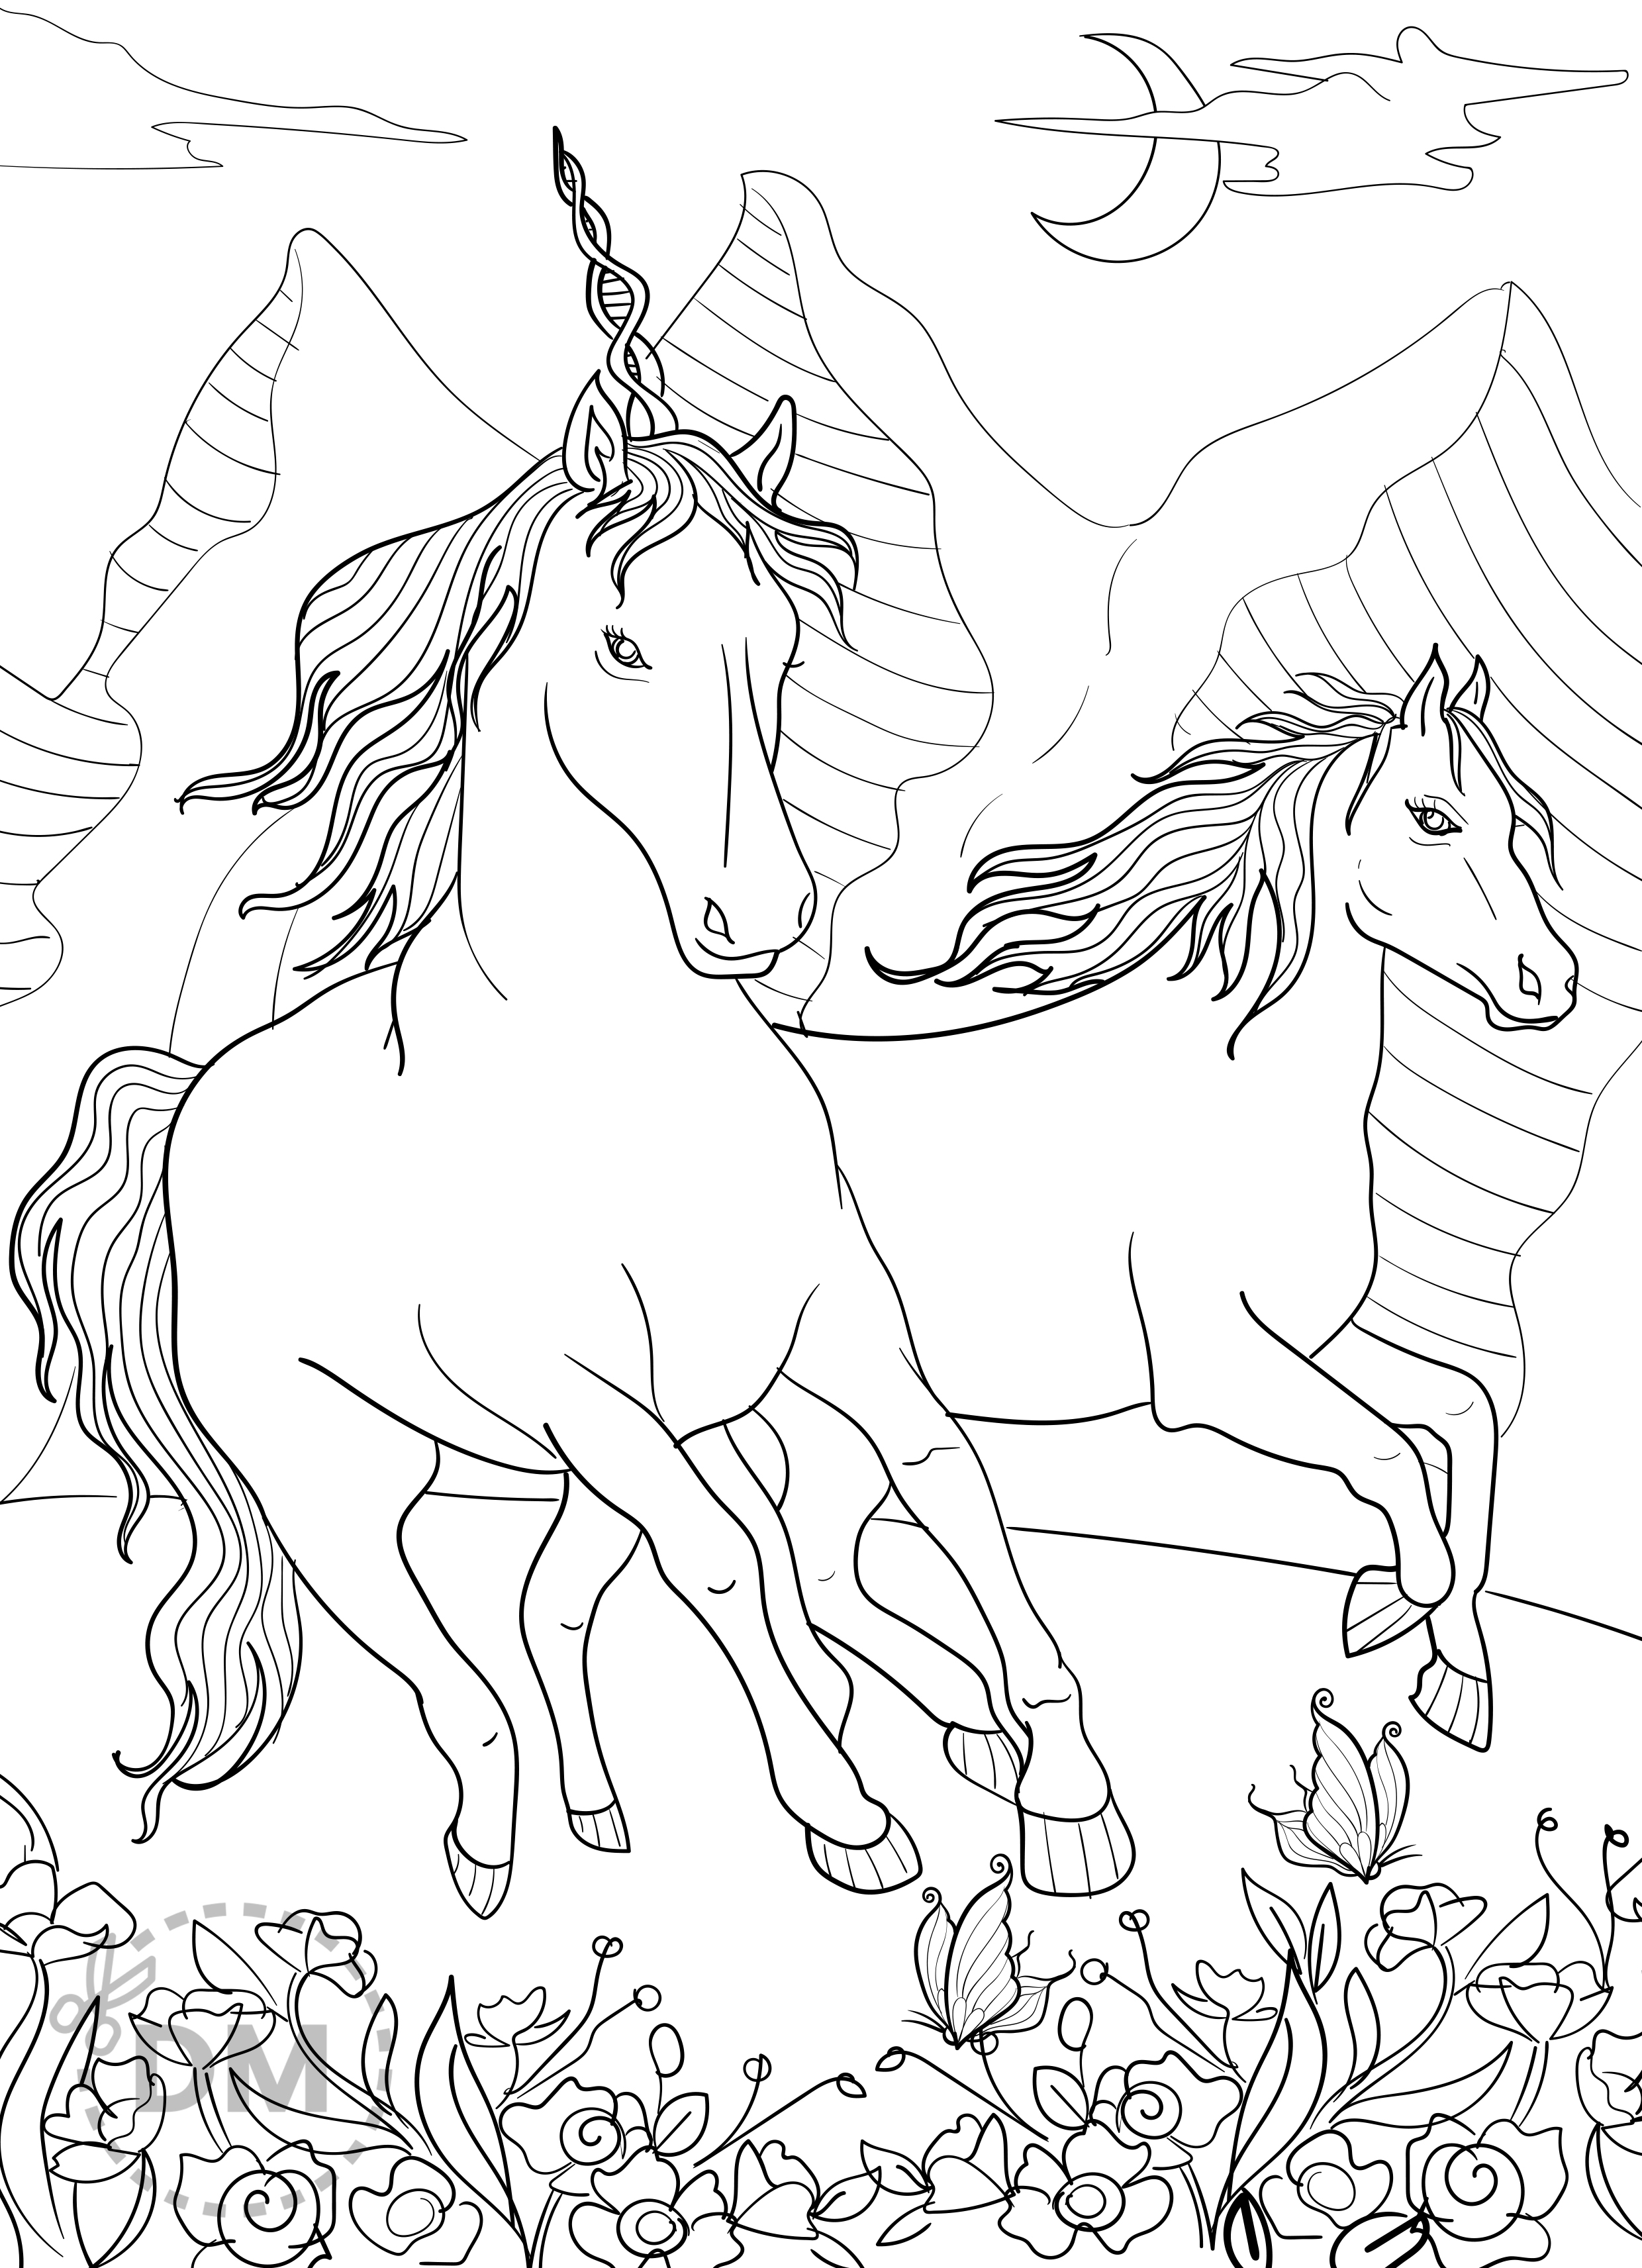 Printable Horse Coloring Page for Kids   diy magazine.com